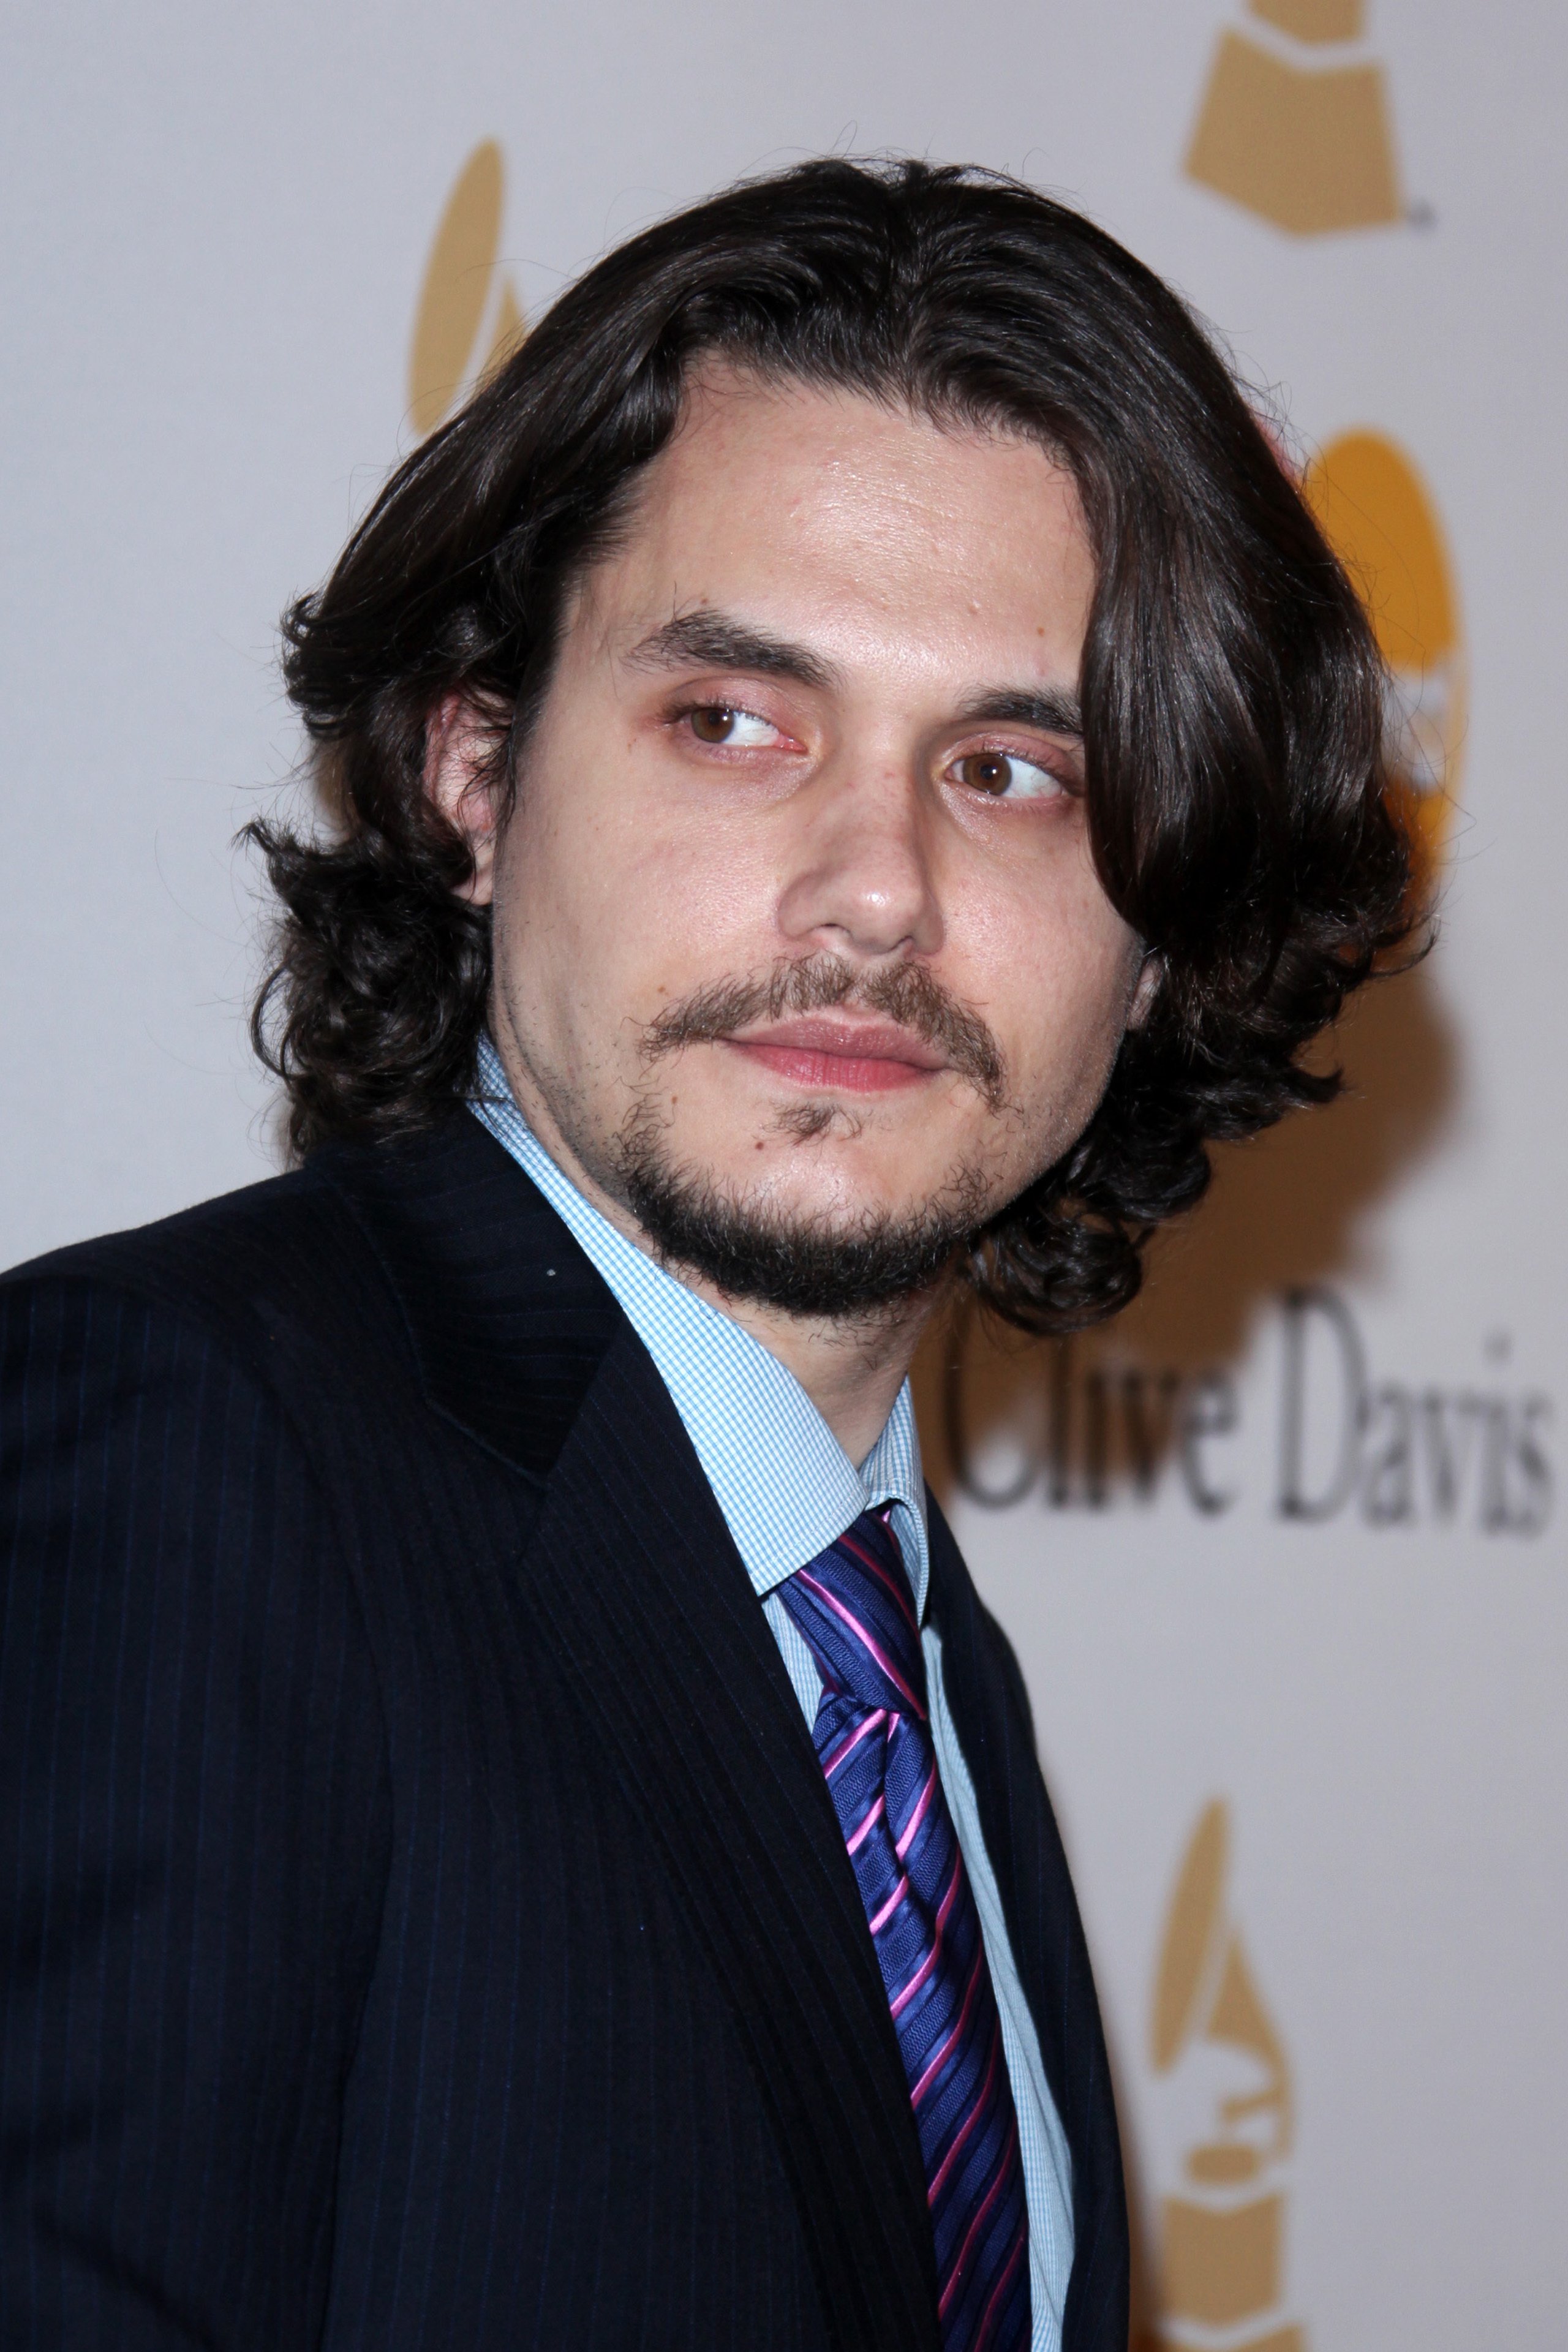 John Mayer pictured at the Pre-GRAMMY Gala And Salute To Industry Icons, 2011, California. | Photo: Shutterstock